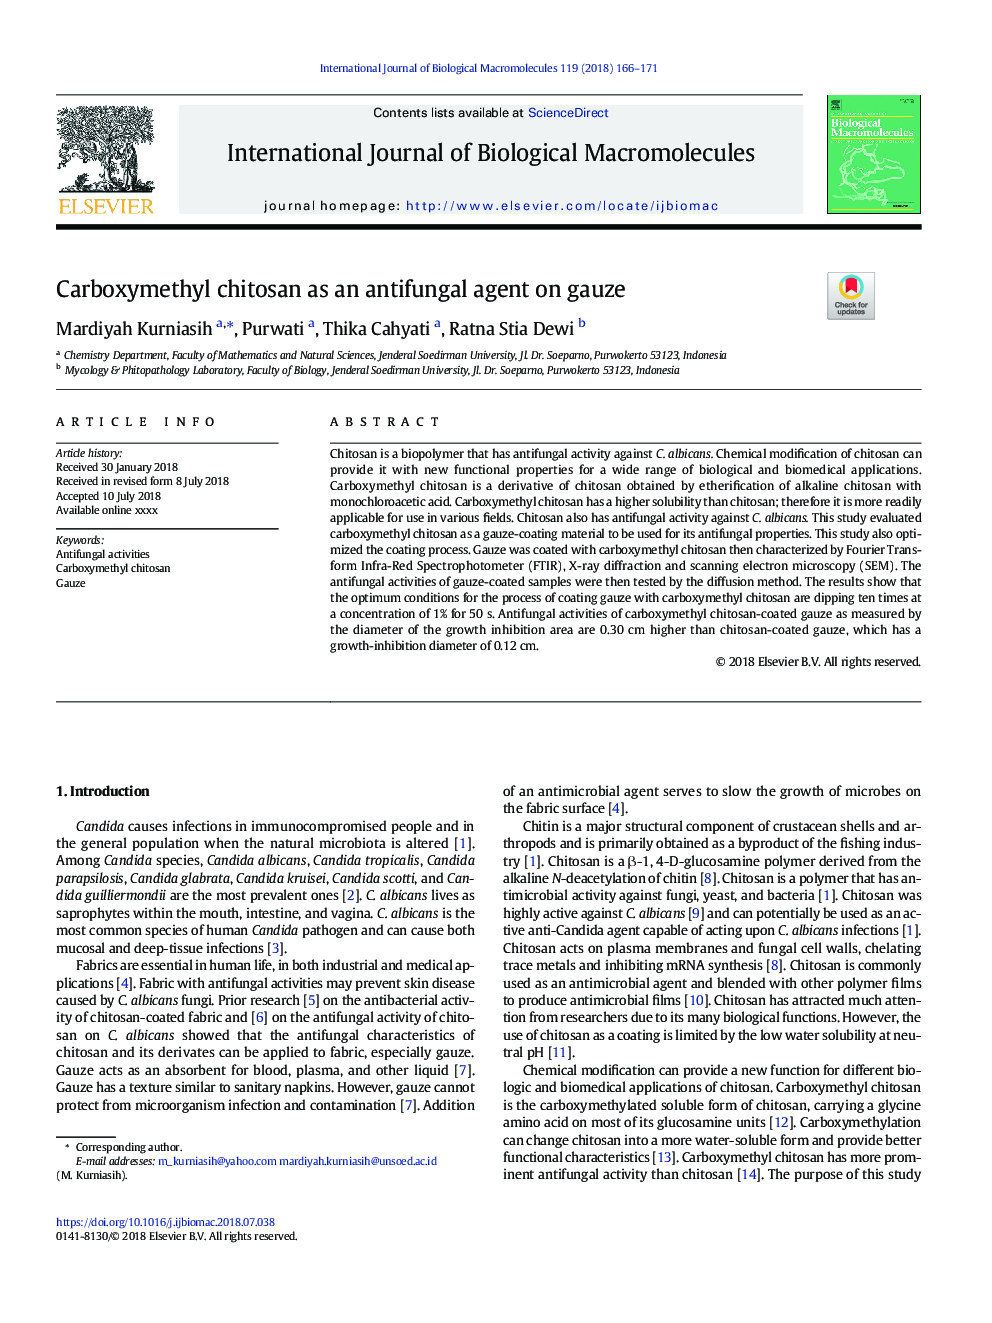 Carboxymethyl chitosan as an antifungal agent on gauze